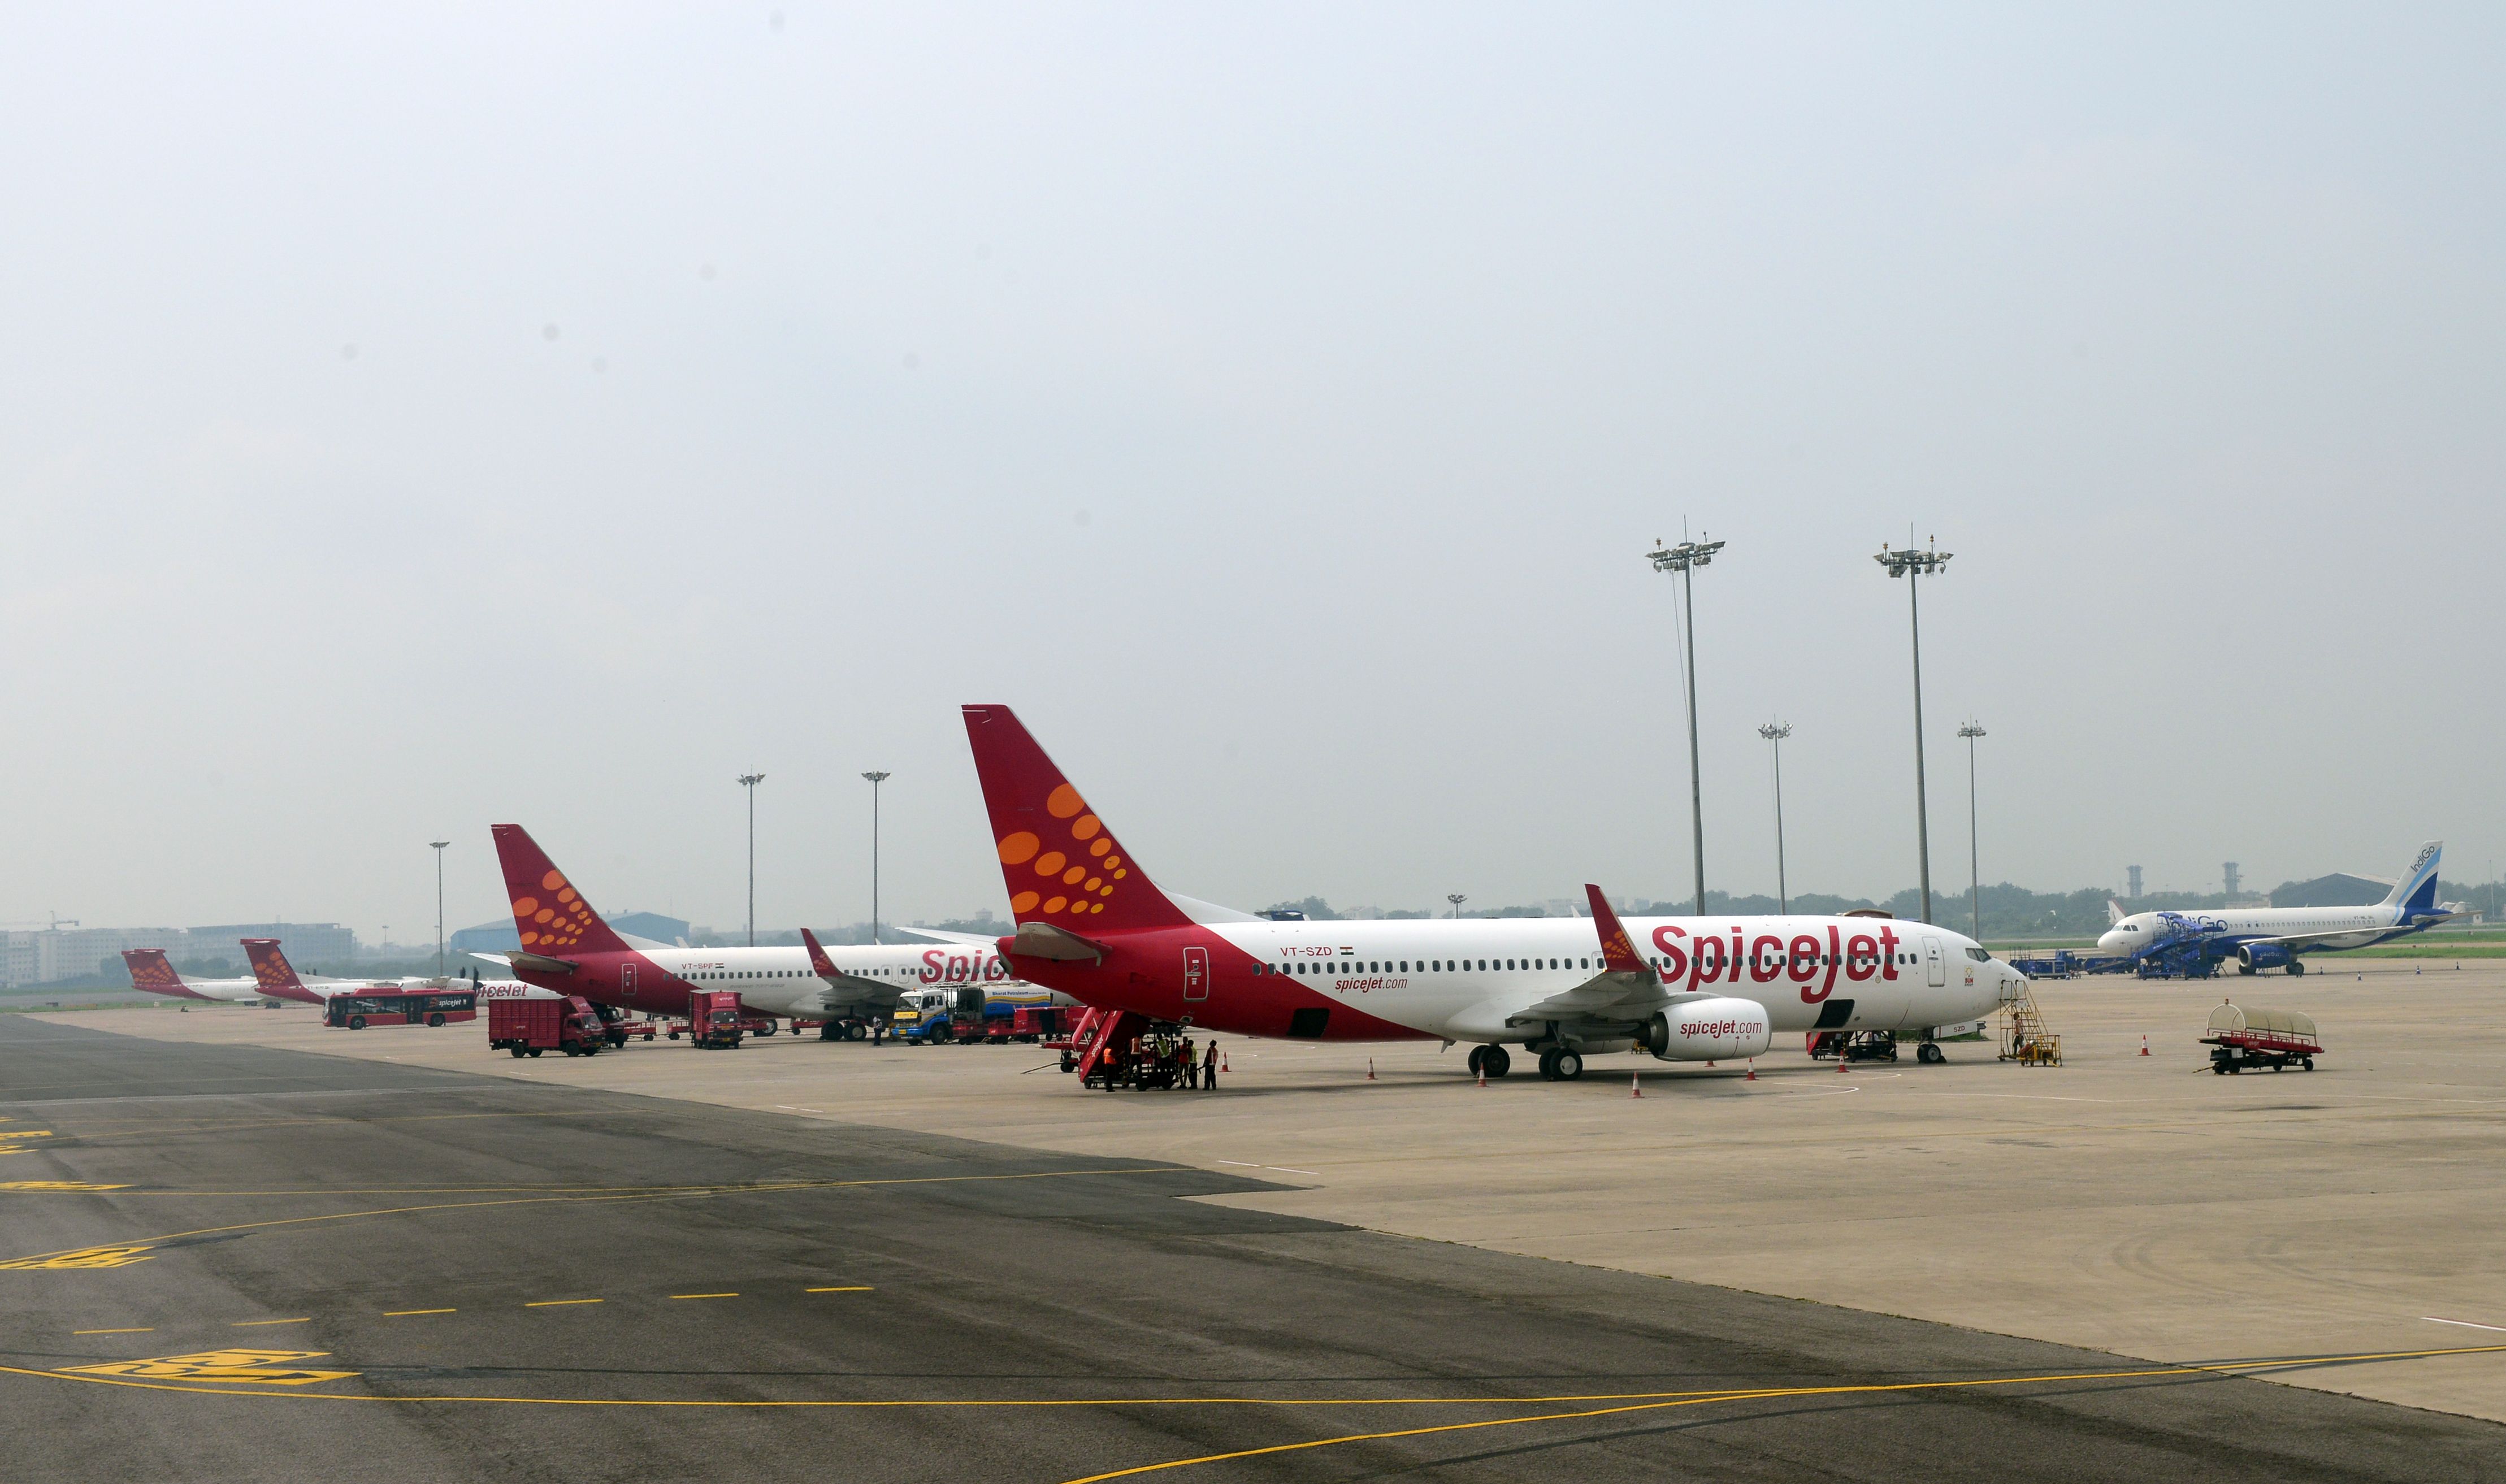 SpiceJet planes parked at the IGI airport in Delhi.